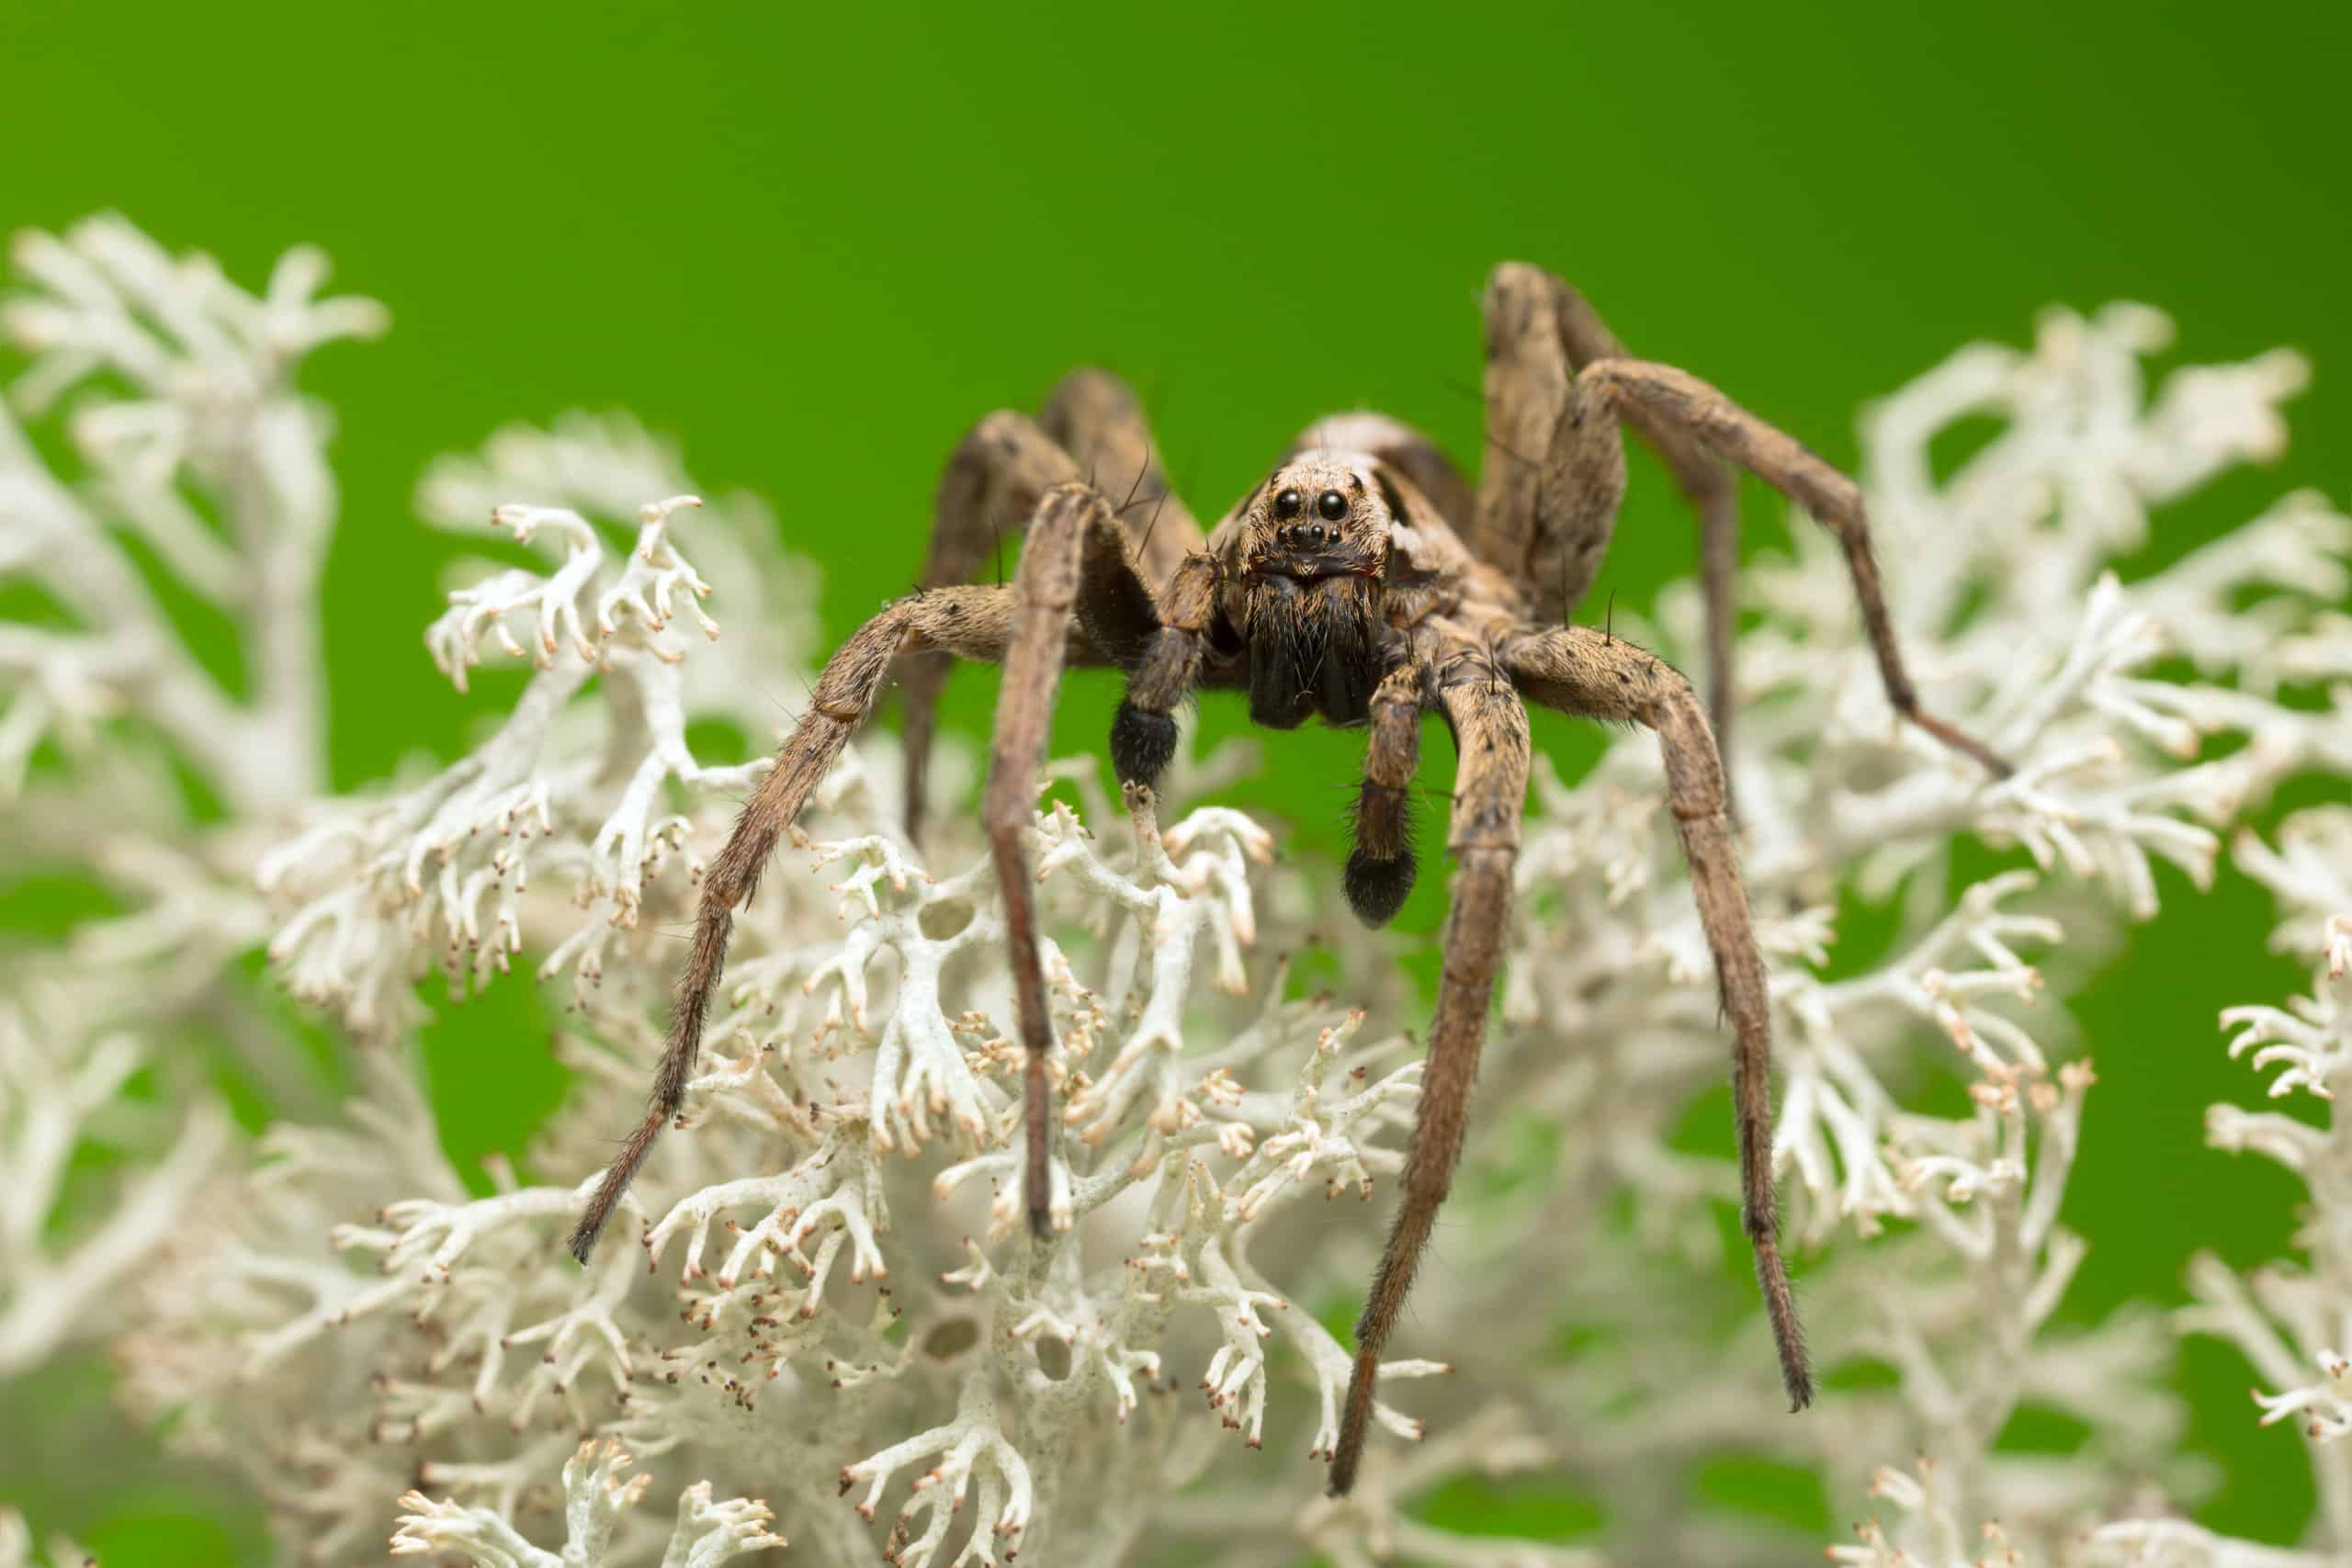 Is it safe to pick up a wolf spider? - Quora